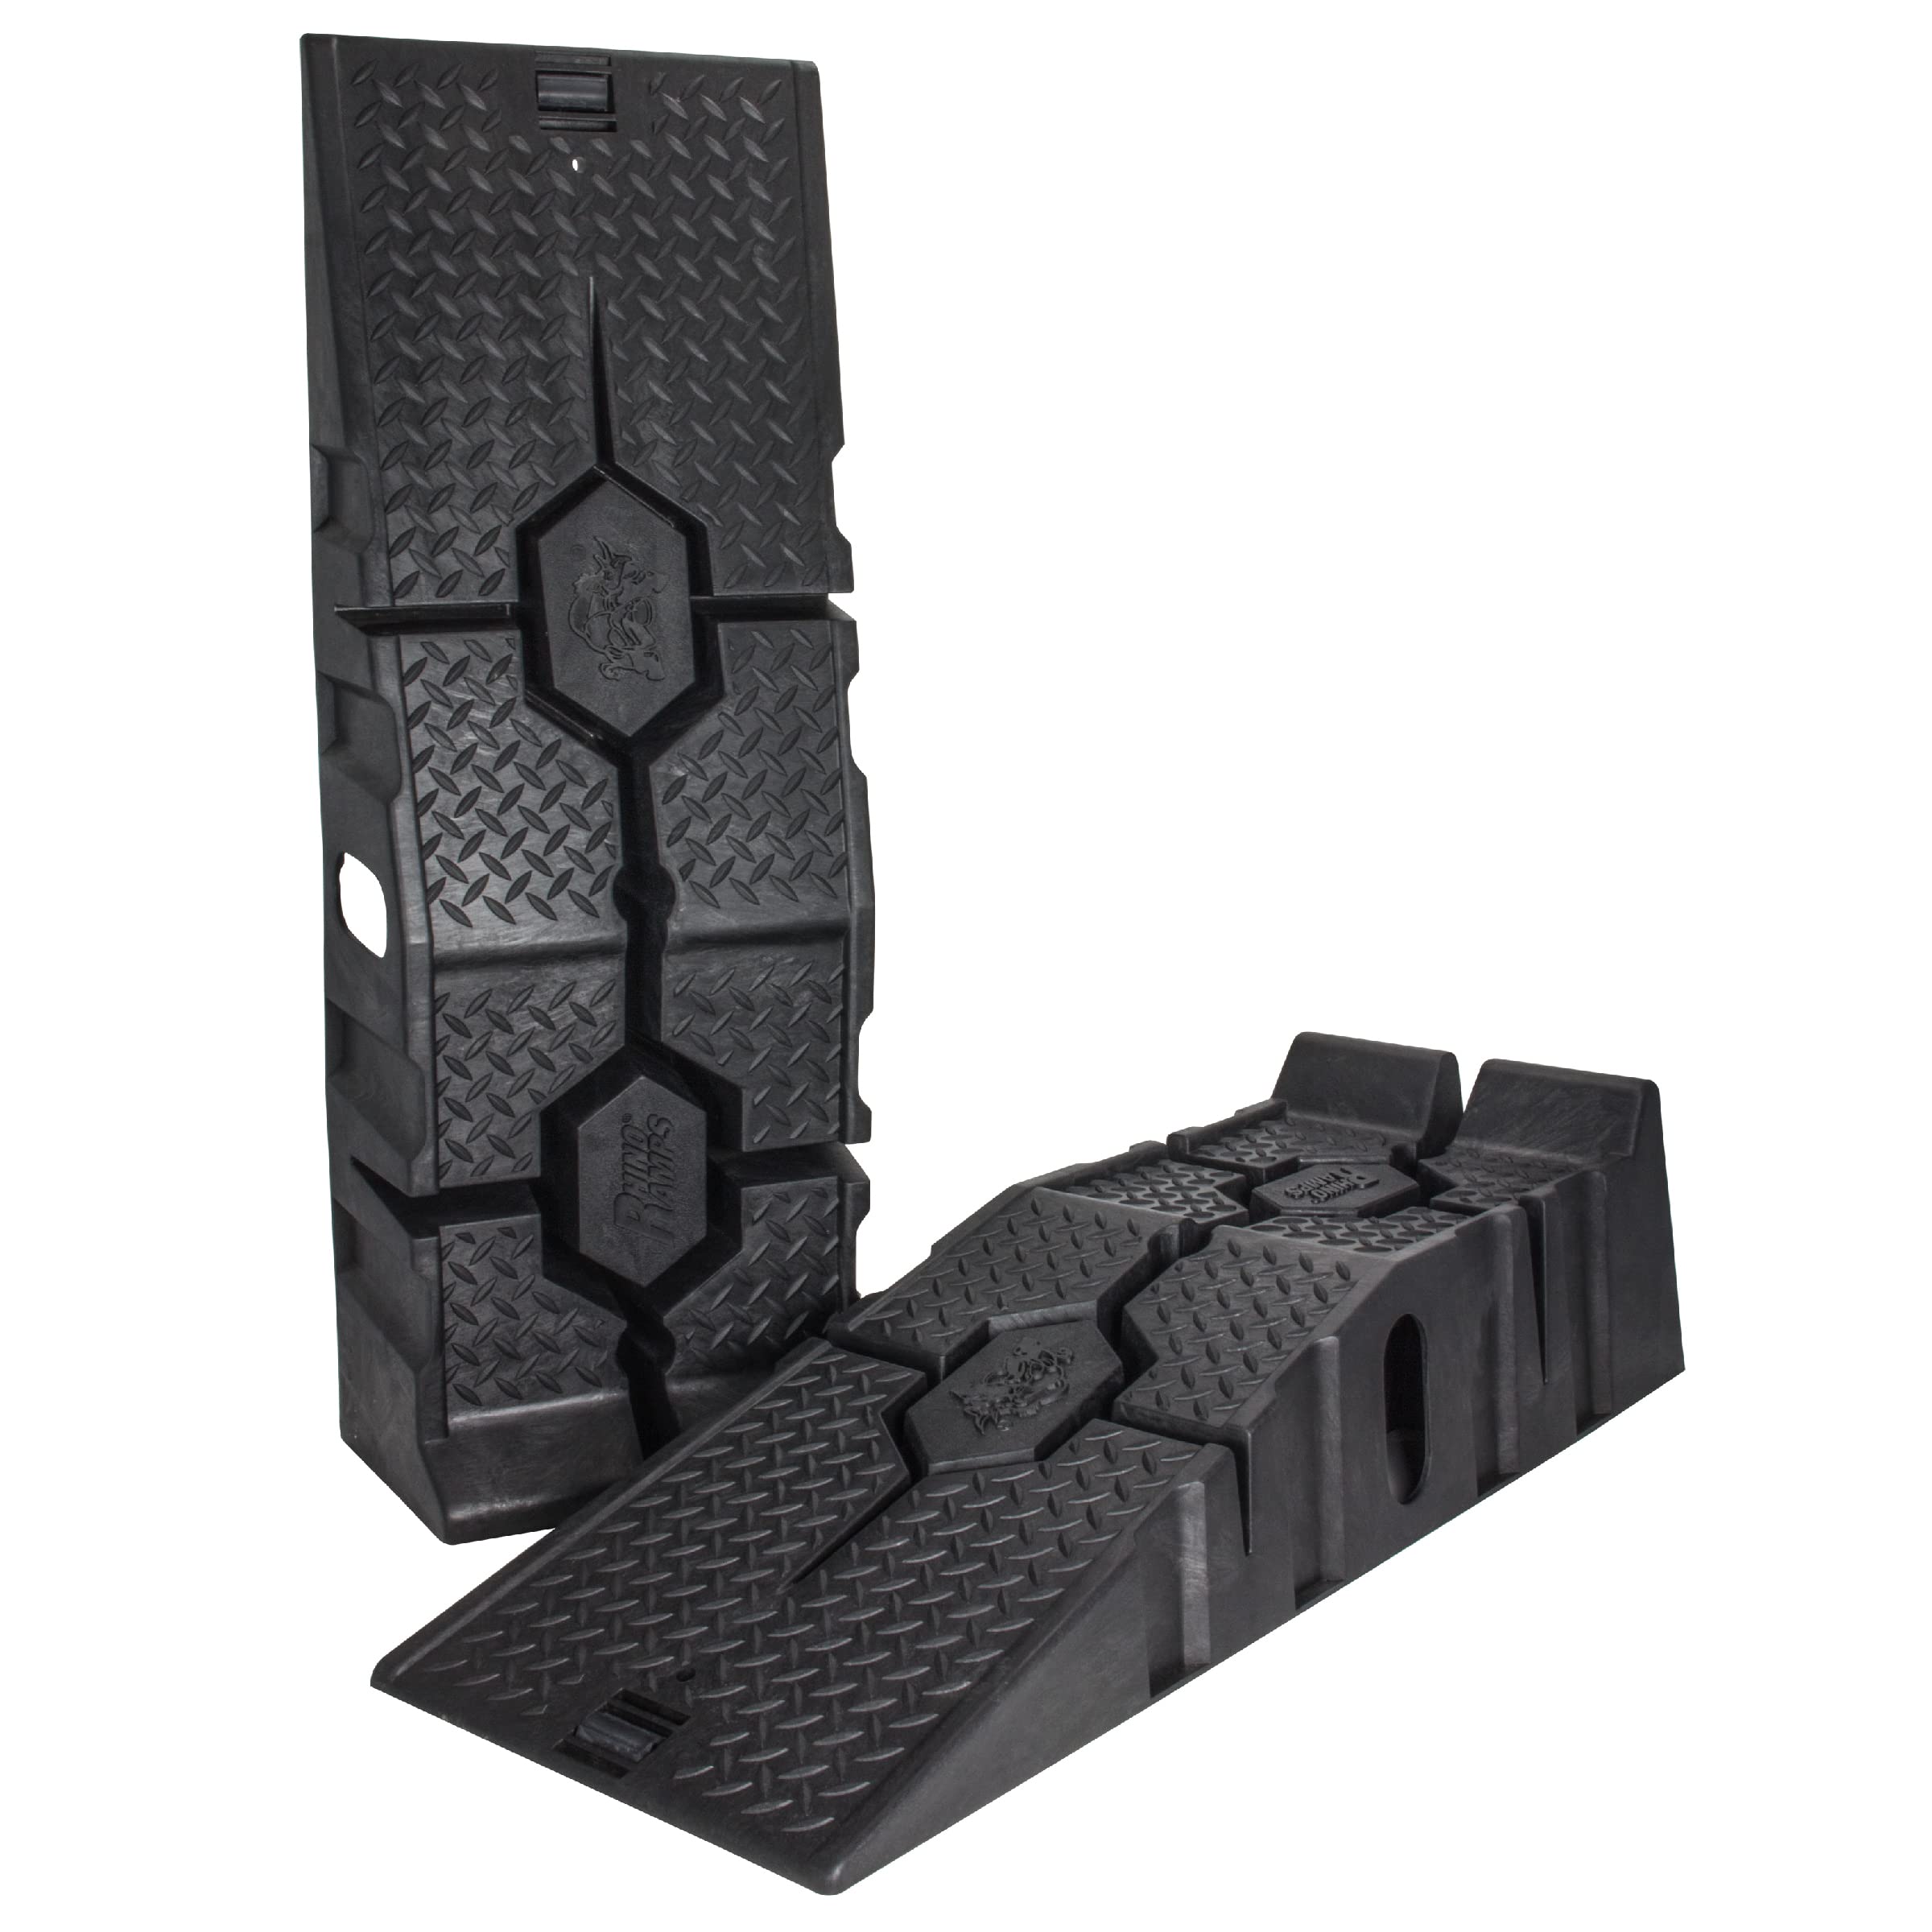 FloTool 11912ABMI RhinoRamp MAX Vehicle Ramp Pair - Ideal for Heavy-Duty Home Garage Maintenance - Reduces Slippage - Works with Low Clearance Vehicles - 16,000lb GVW Capacity - Extra-Wide Design